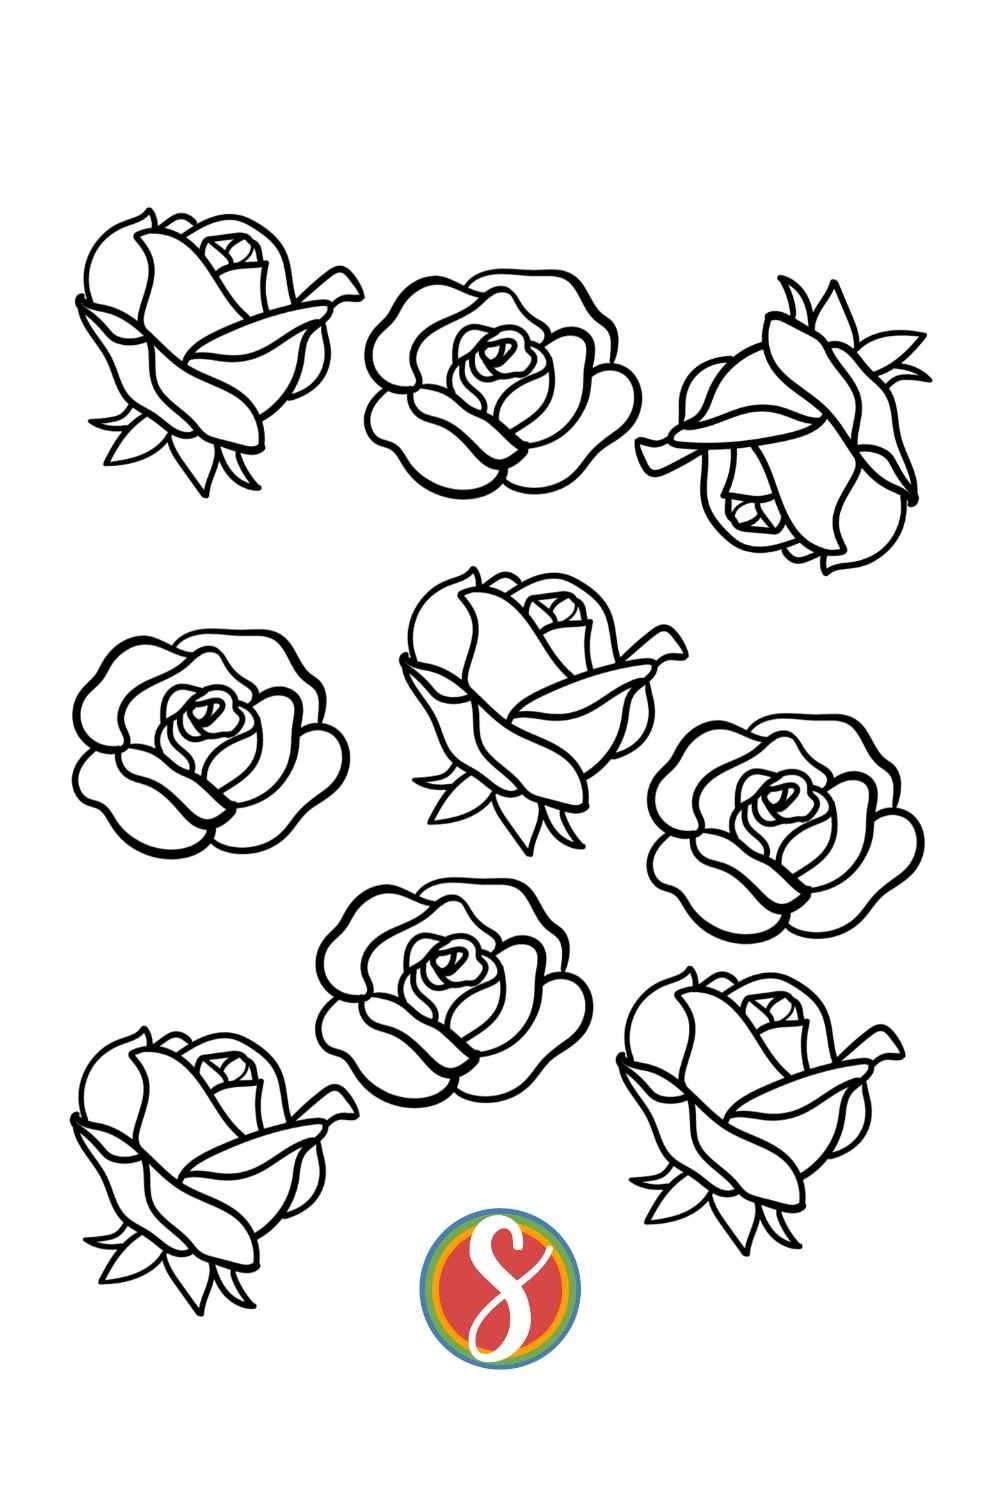 9 roses to color